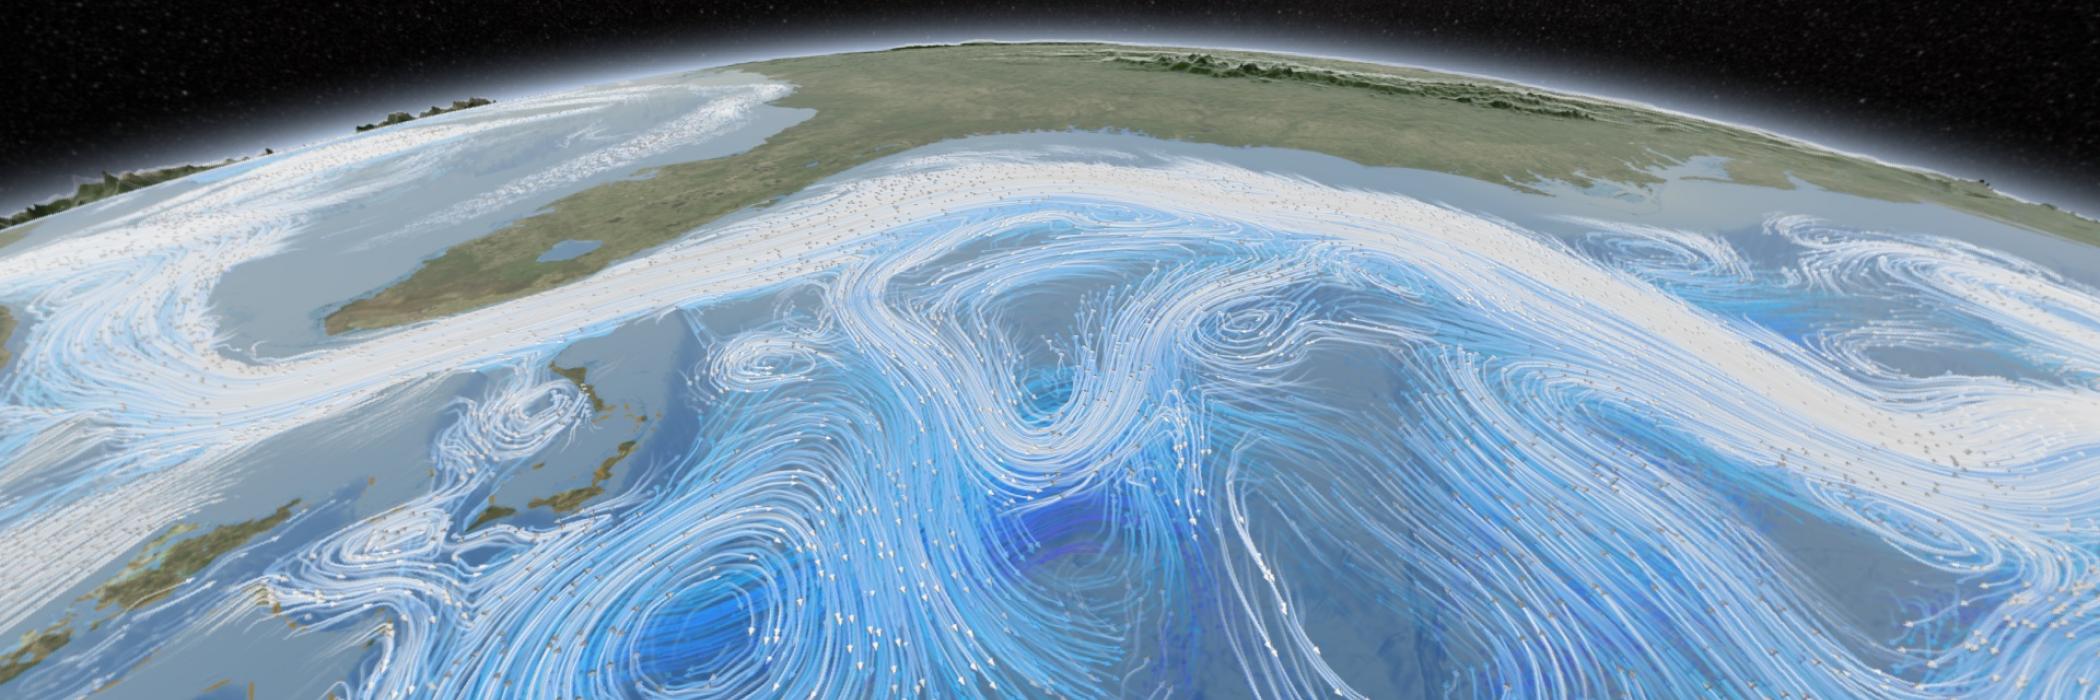 The global ocean circulation system and the circulation system of the atmosphere are changing due to global warming. This NASA illustration shows a complex pattern of large and minor surface currents.